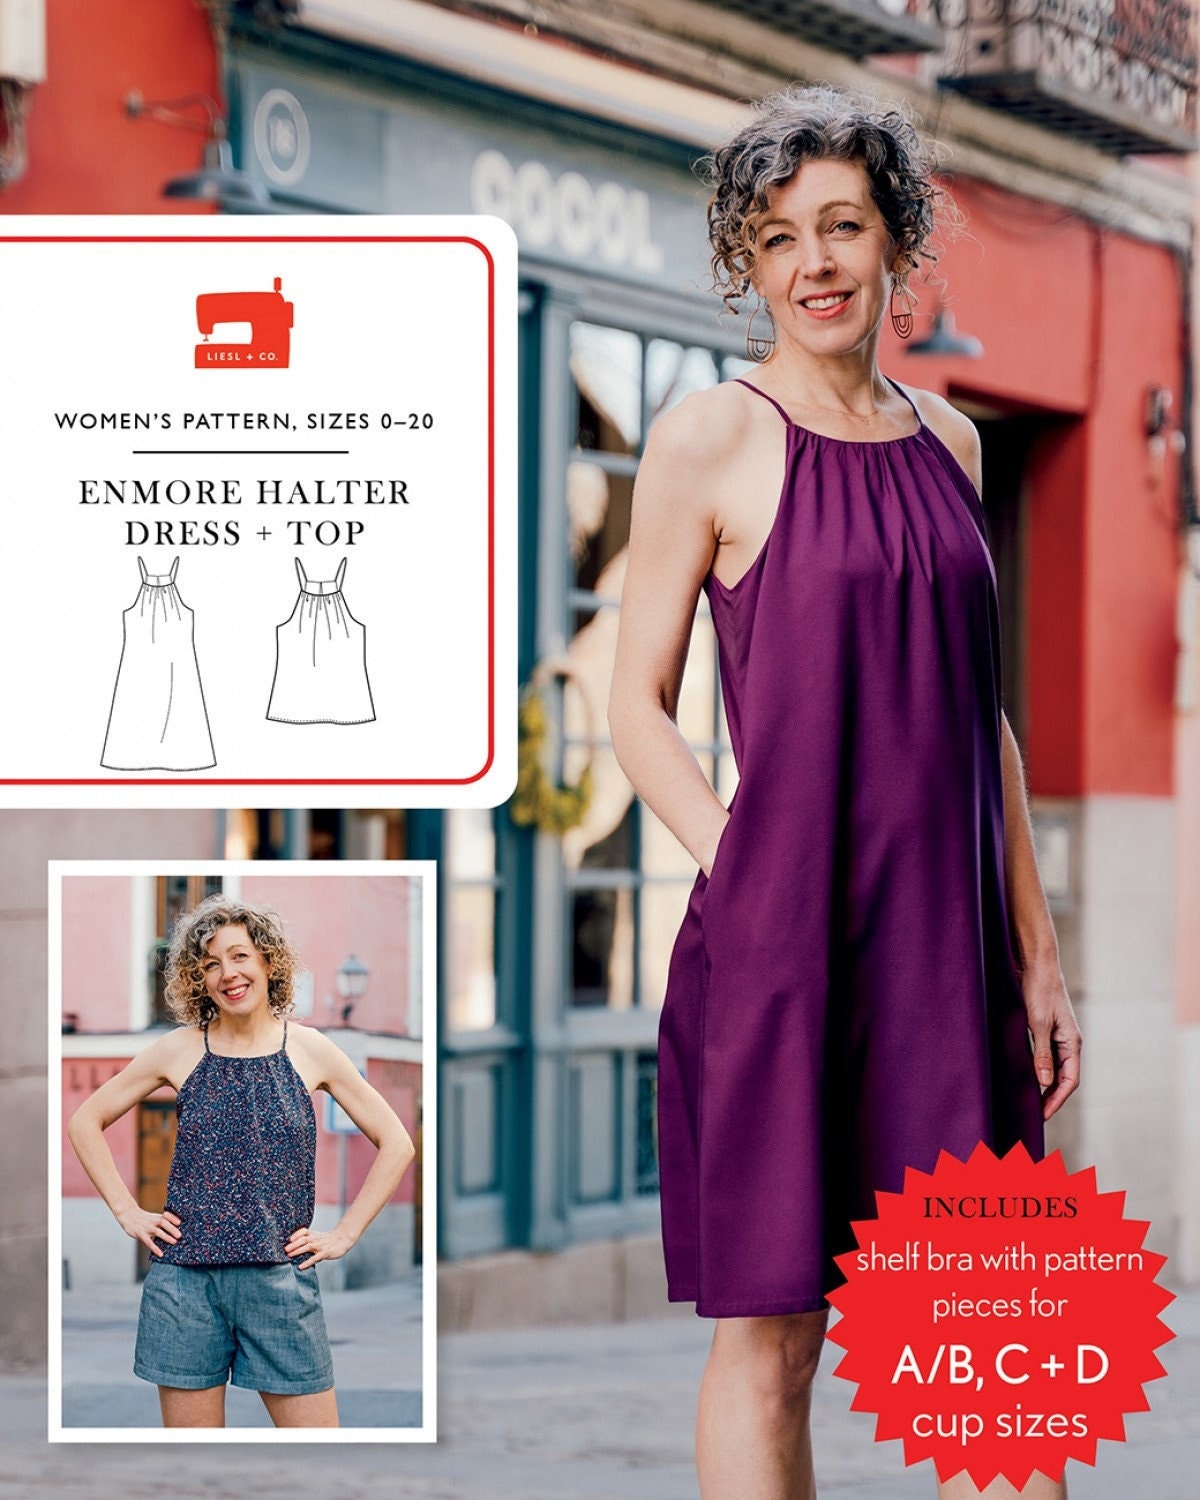 Enmore Halter Dress and Top Pattern, Liesl + Co., RestlessNeedle, Includes  Shelf Bra w/Pattern Pieces for A/B, C and D Cup Sizes, Sizes 0-20